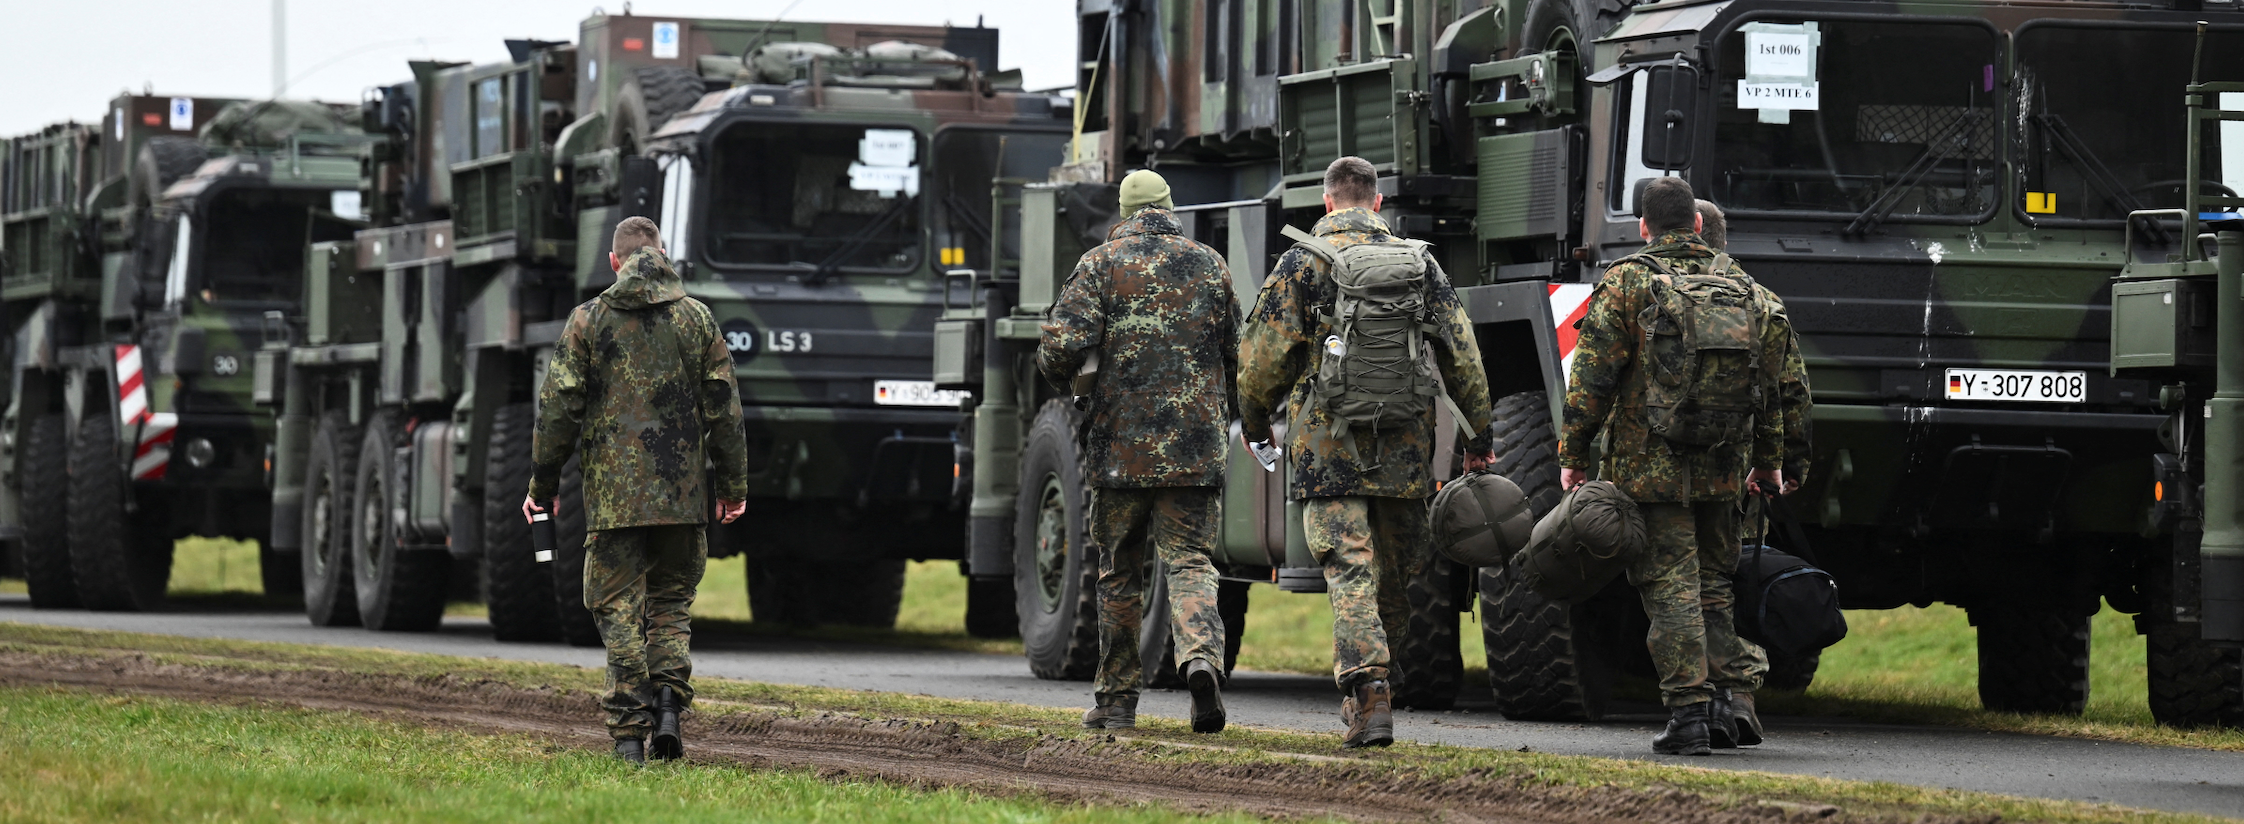 German Air Force soldiers walk past convoy vehicles, as Patriot mobile defense surface-to-air missile systems are transported to Poland